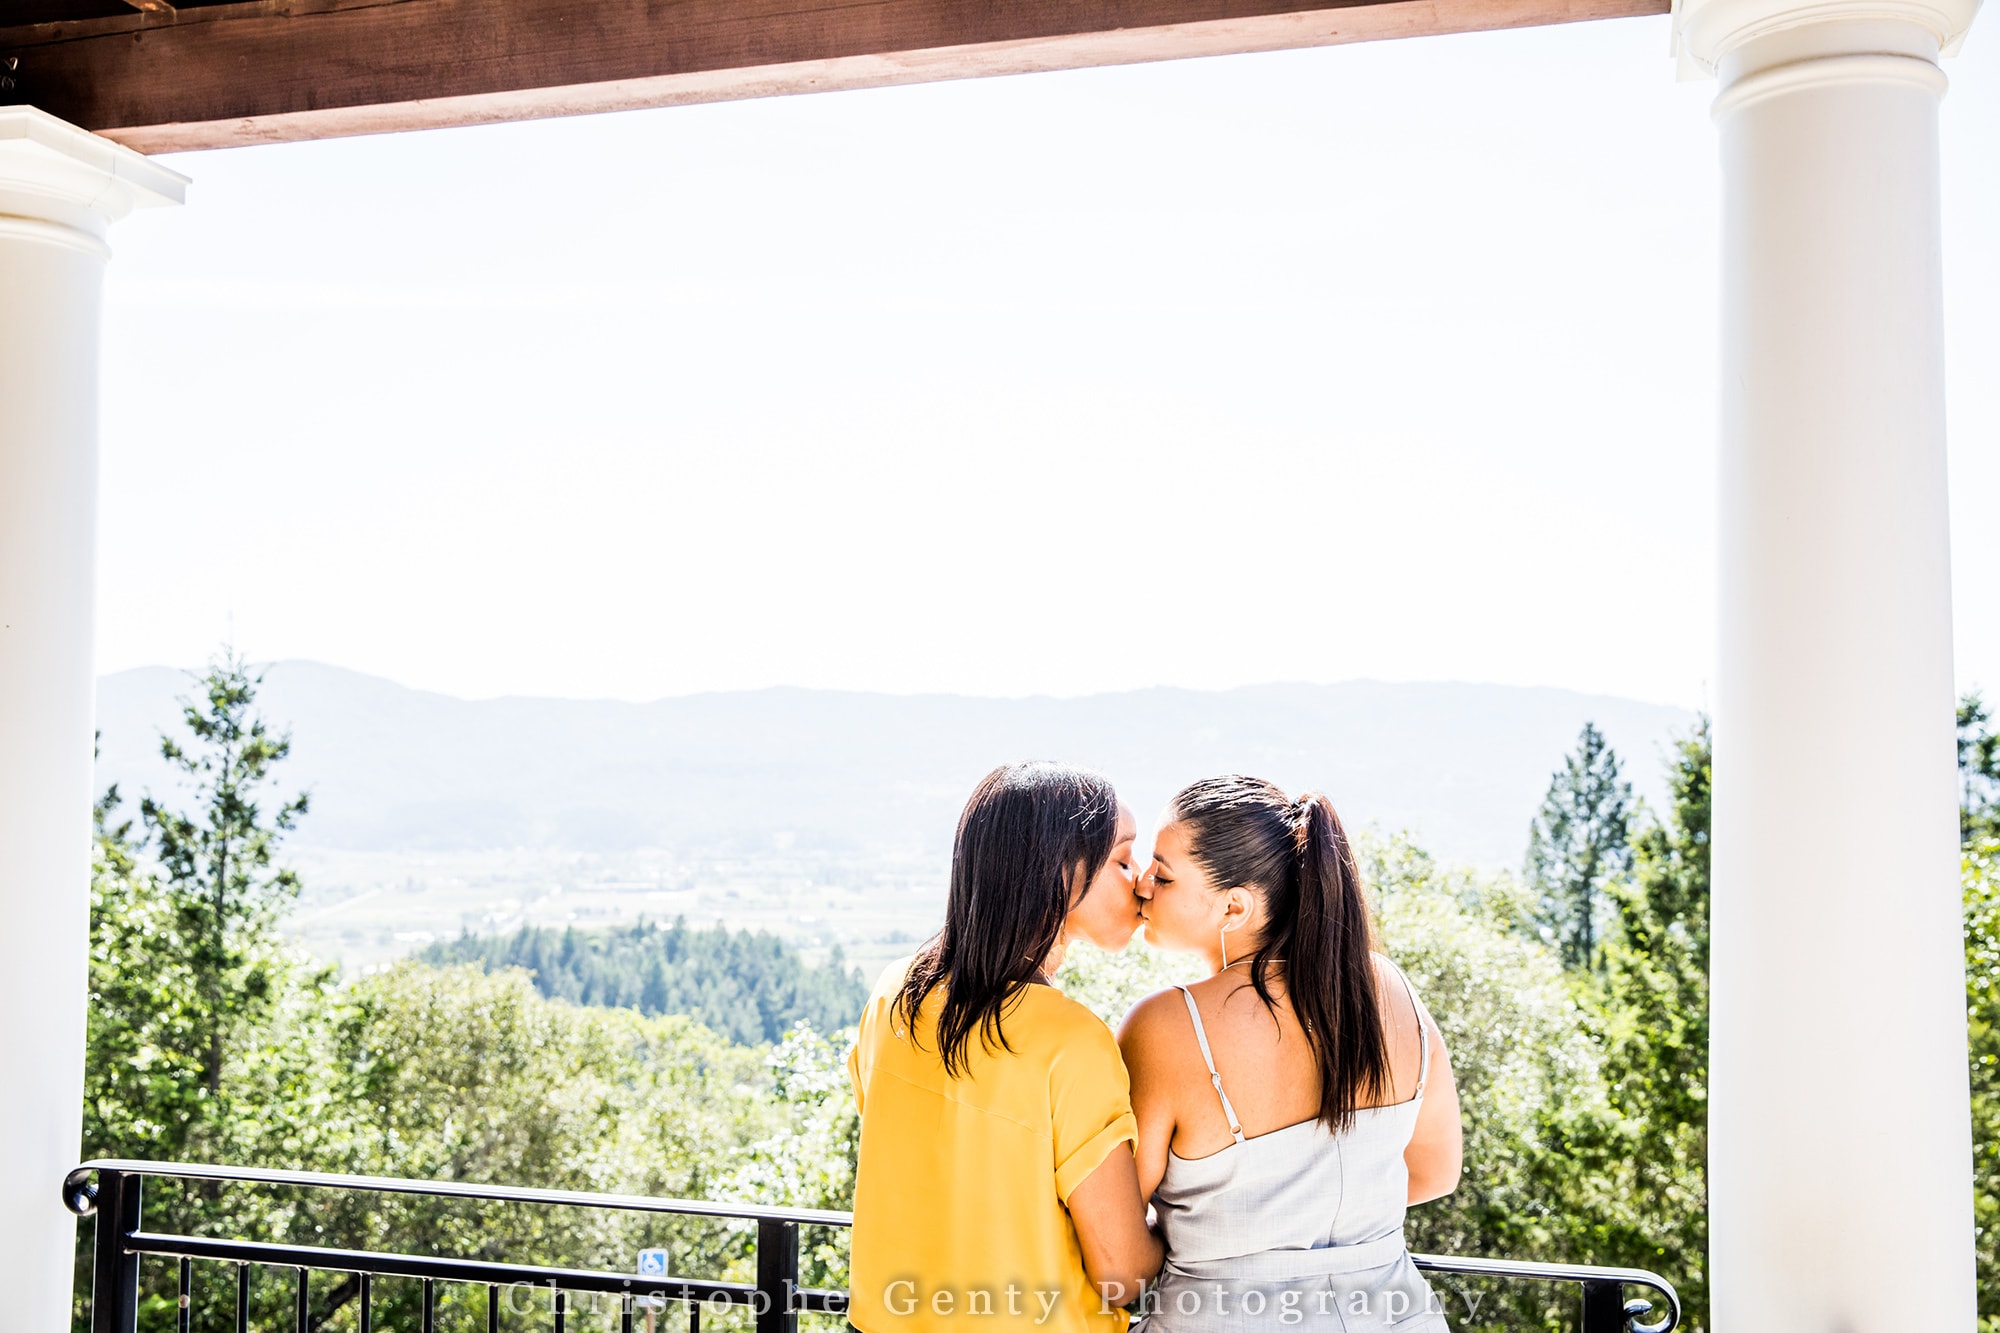 Marriage Proposal Photography in The Napa Valley - Hall Rutherford